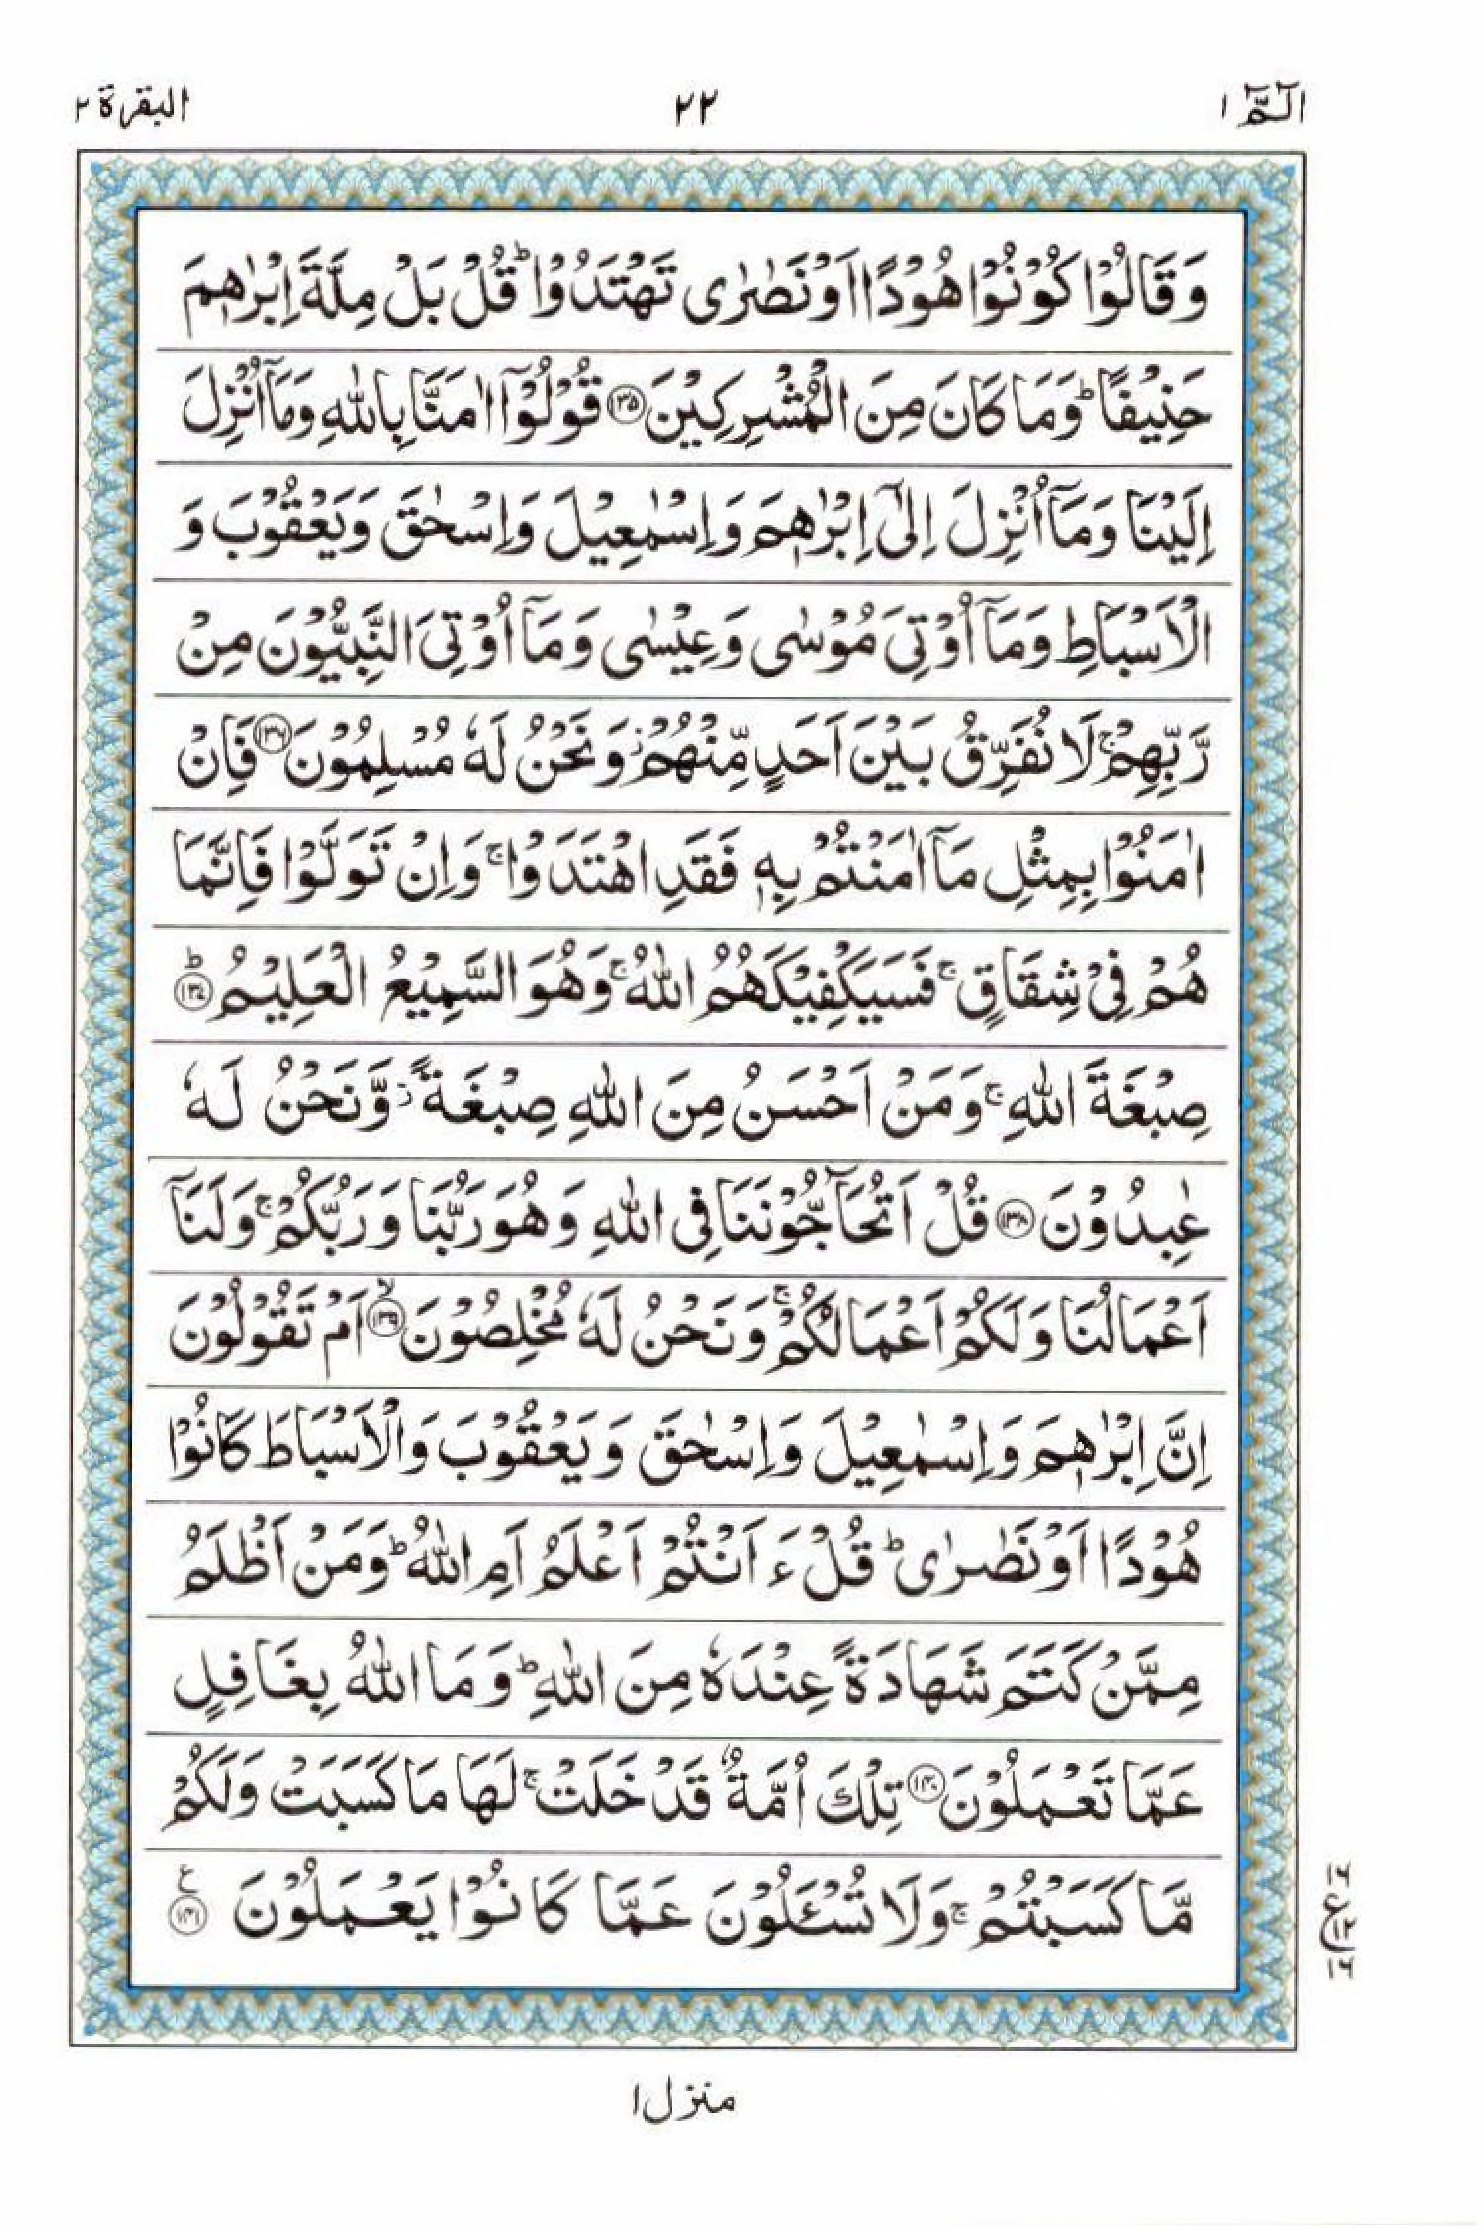 Read 15 Lines Quran, Part / Chapter / Siparah 1 Page 22